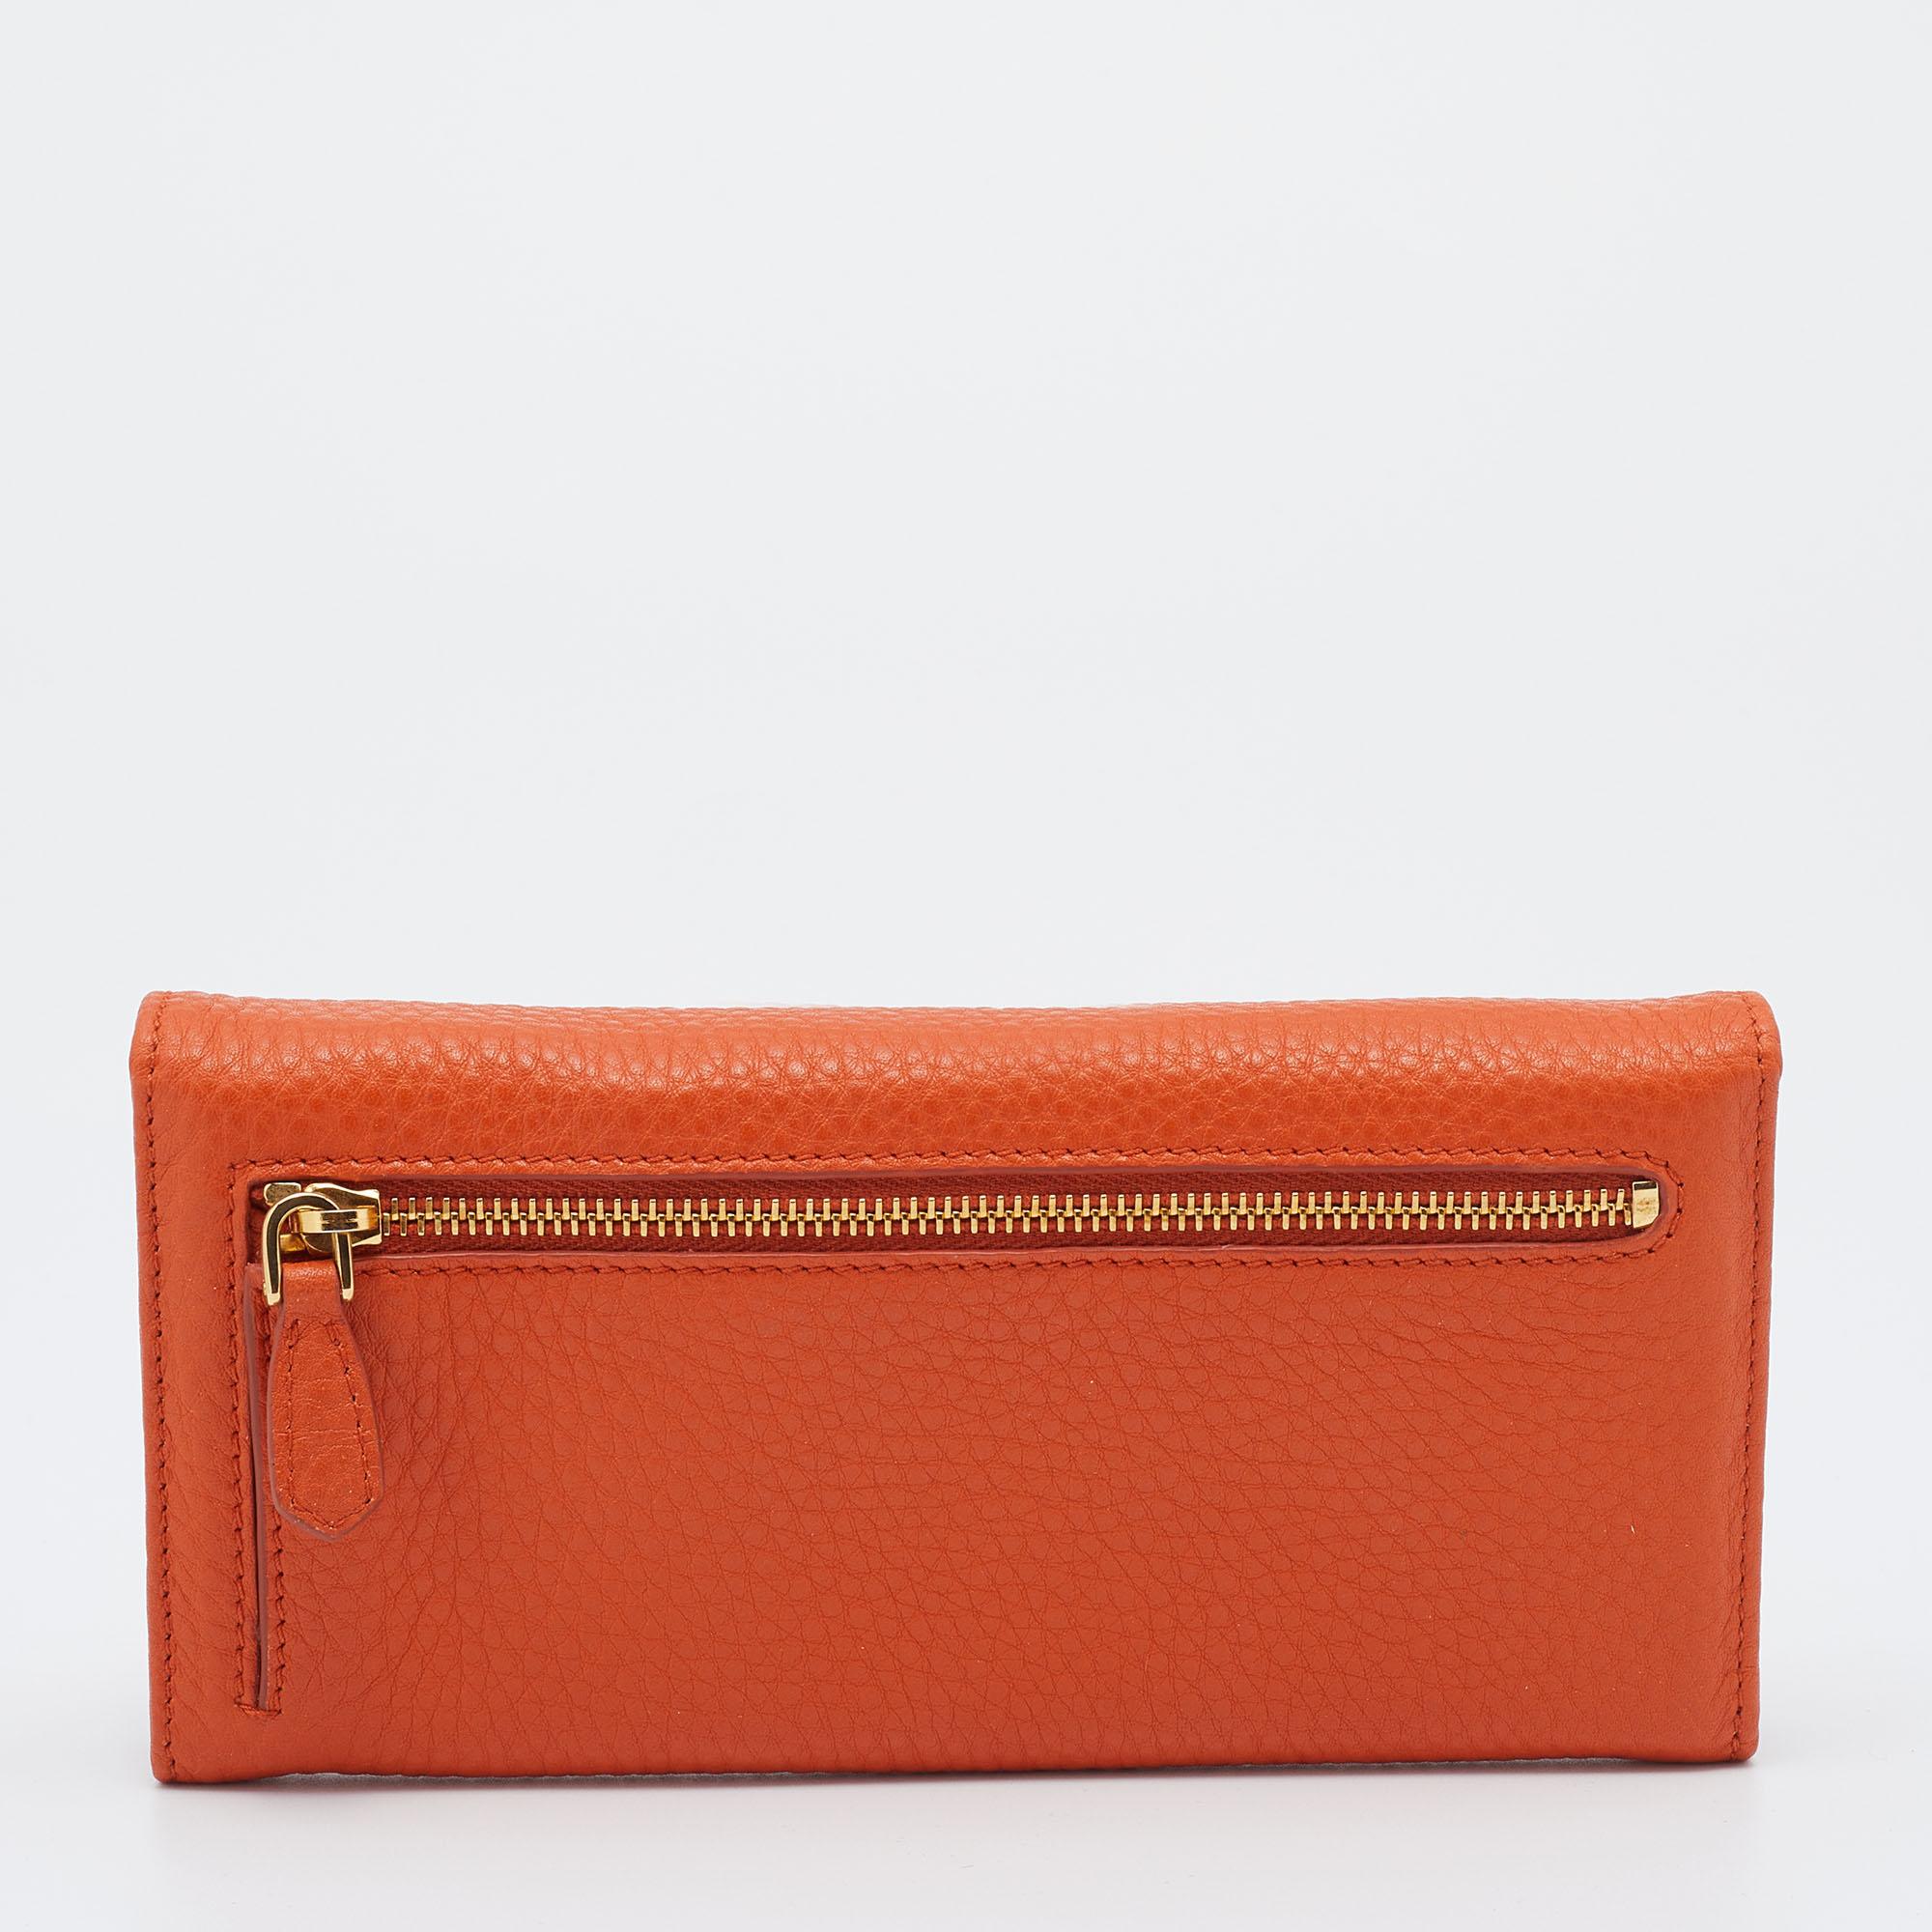 Sophistication meets practicality in this wallet from Prada. Rendered perfectly from leather, it features brand detailing on the front flap and a back zipper pocket. The leather and fabric interior of this orange creation is fitted with different